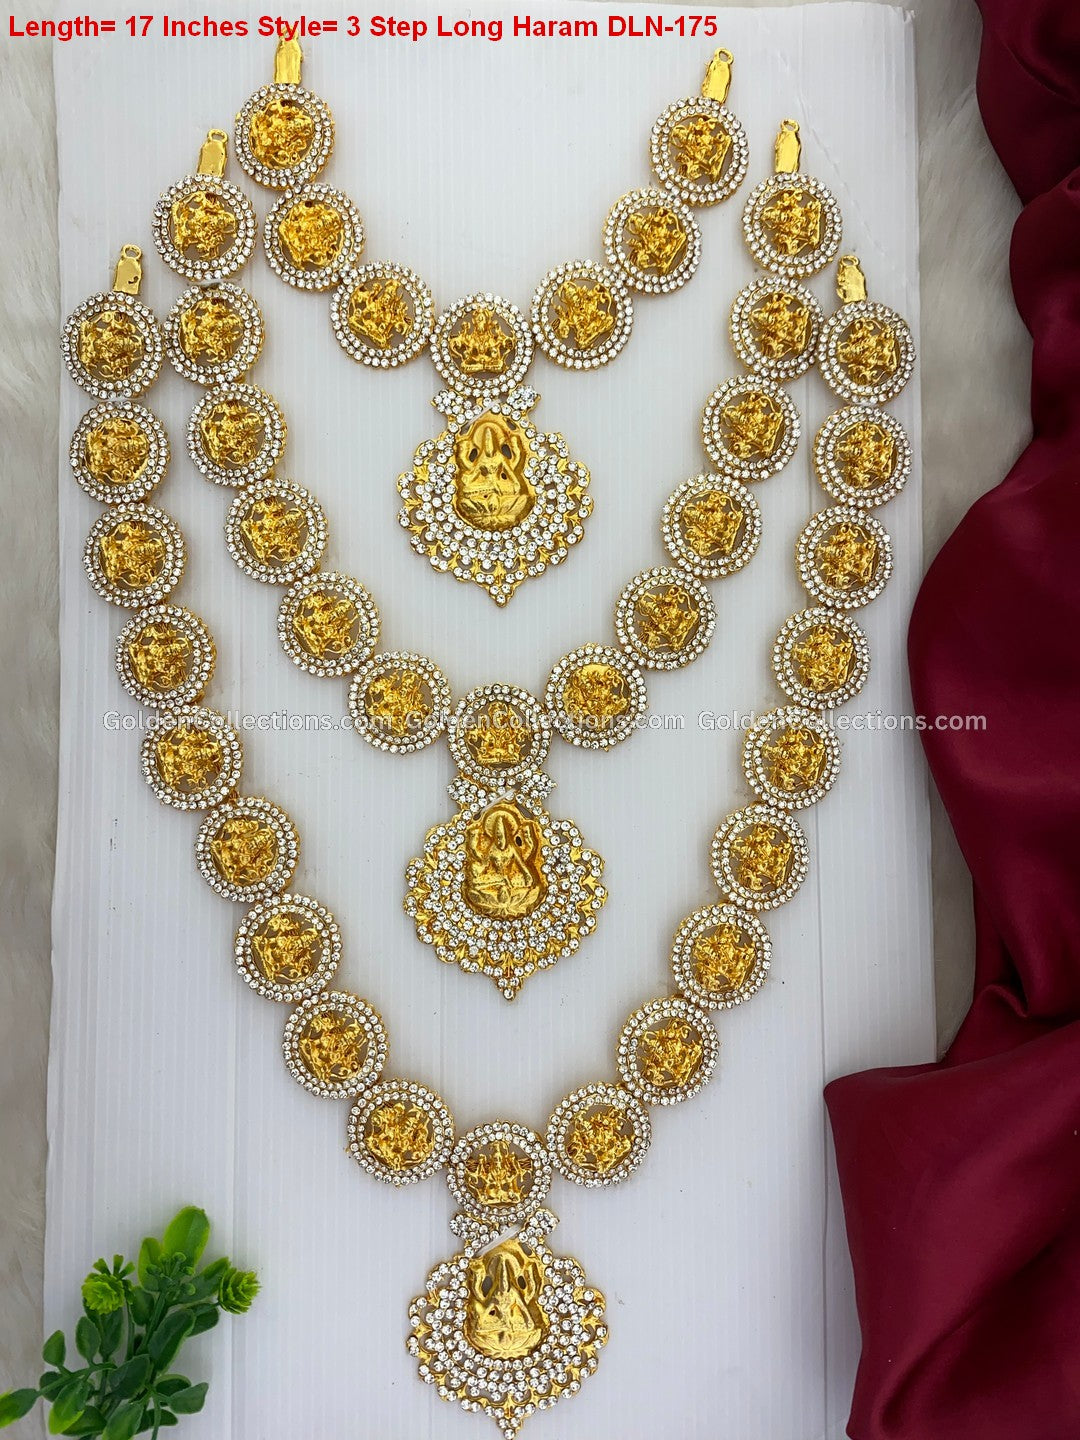 Traditional Amman Stone Long Necklace - Exclusive Design DLN-175